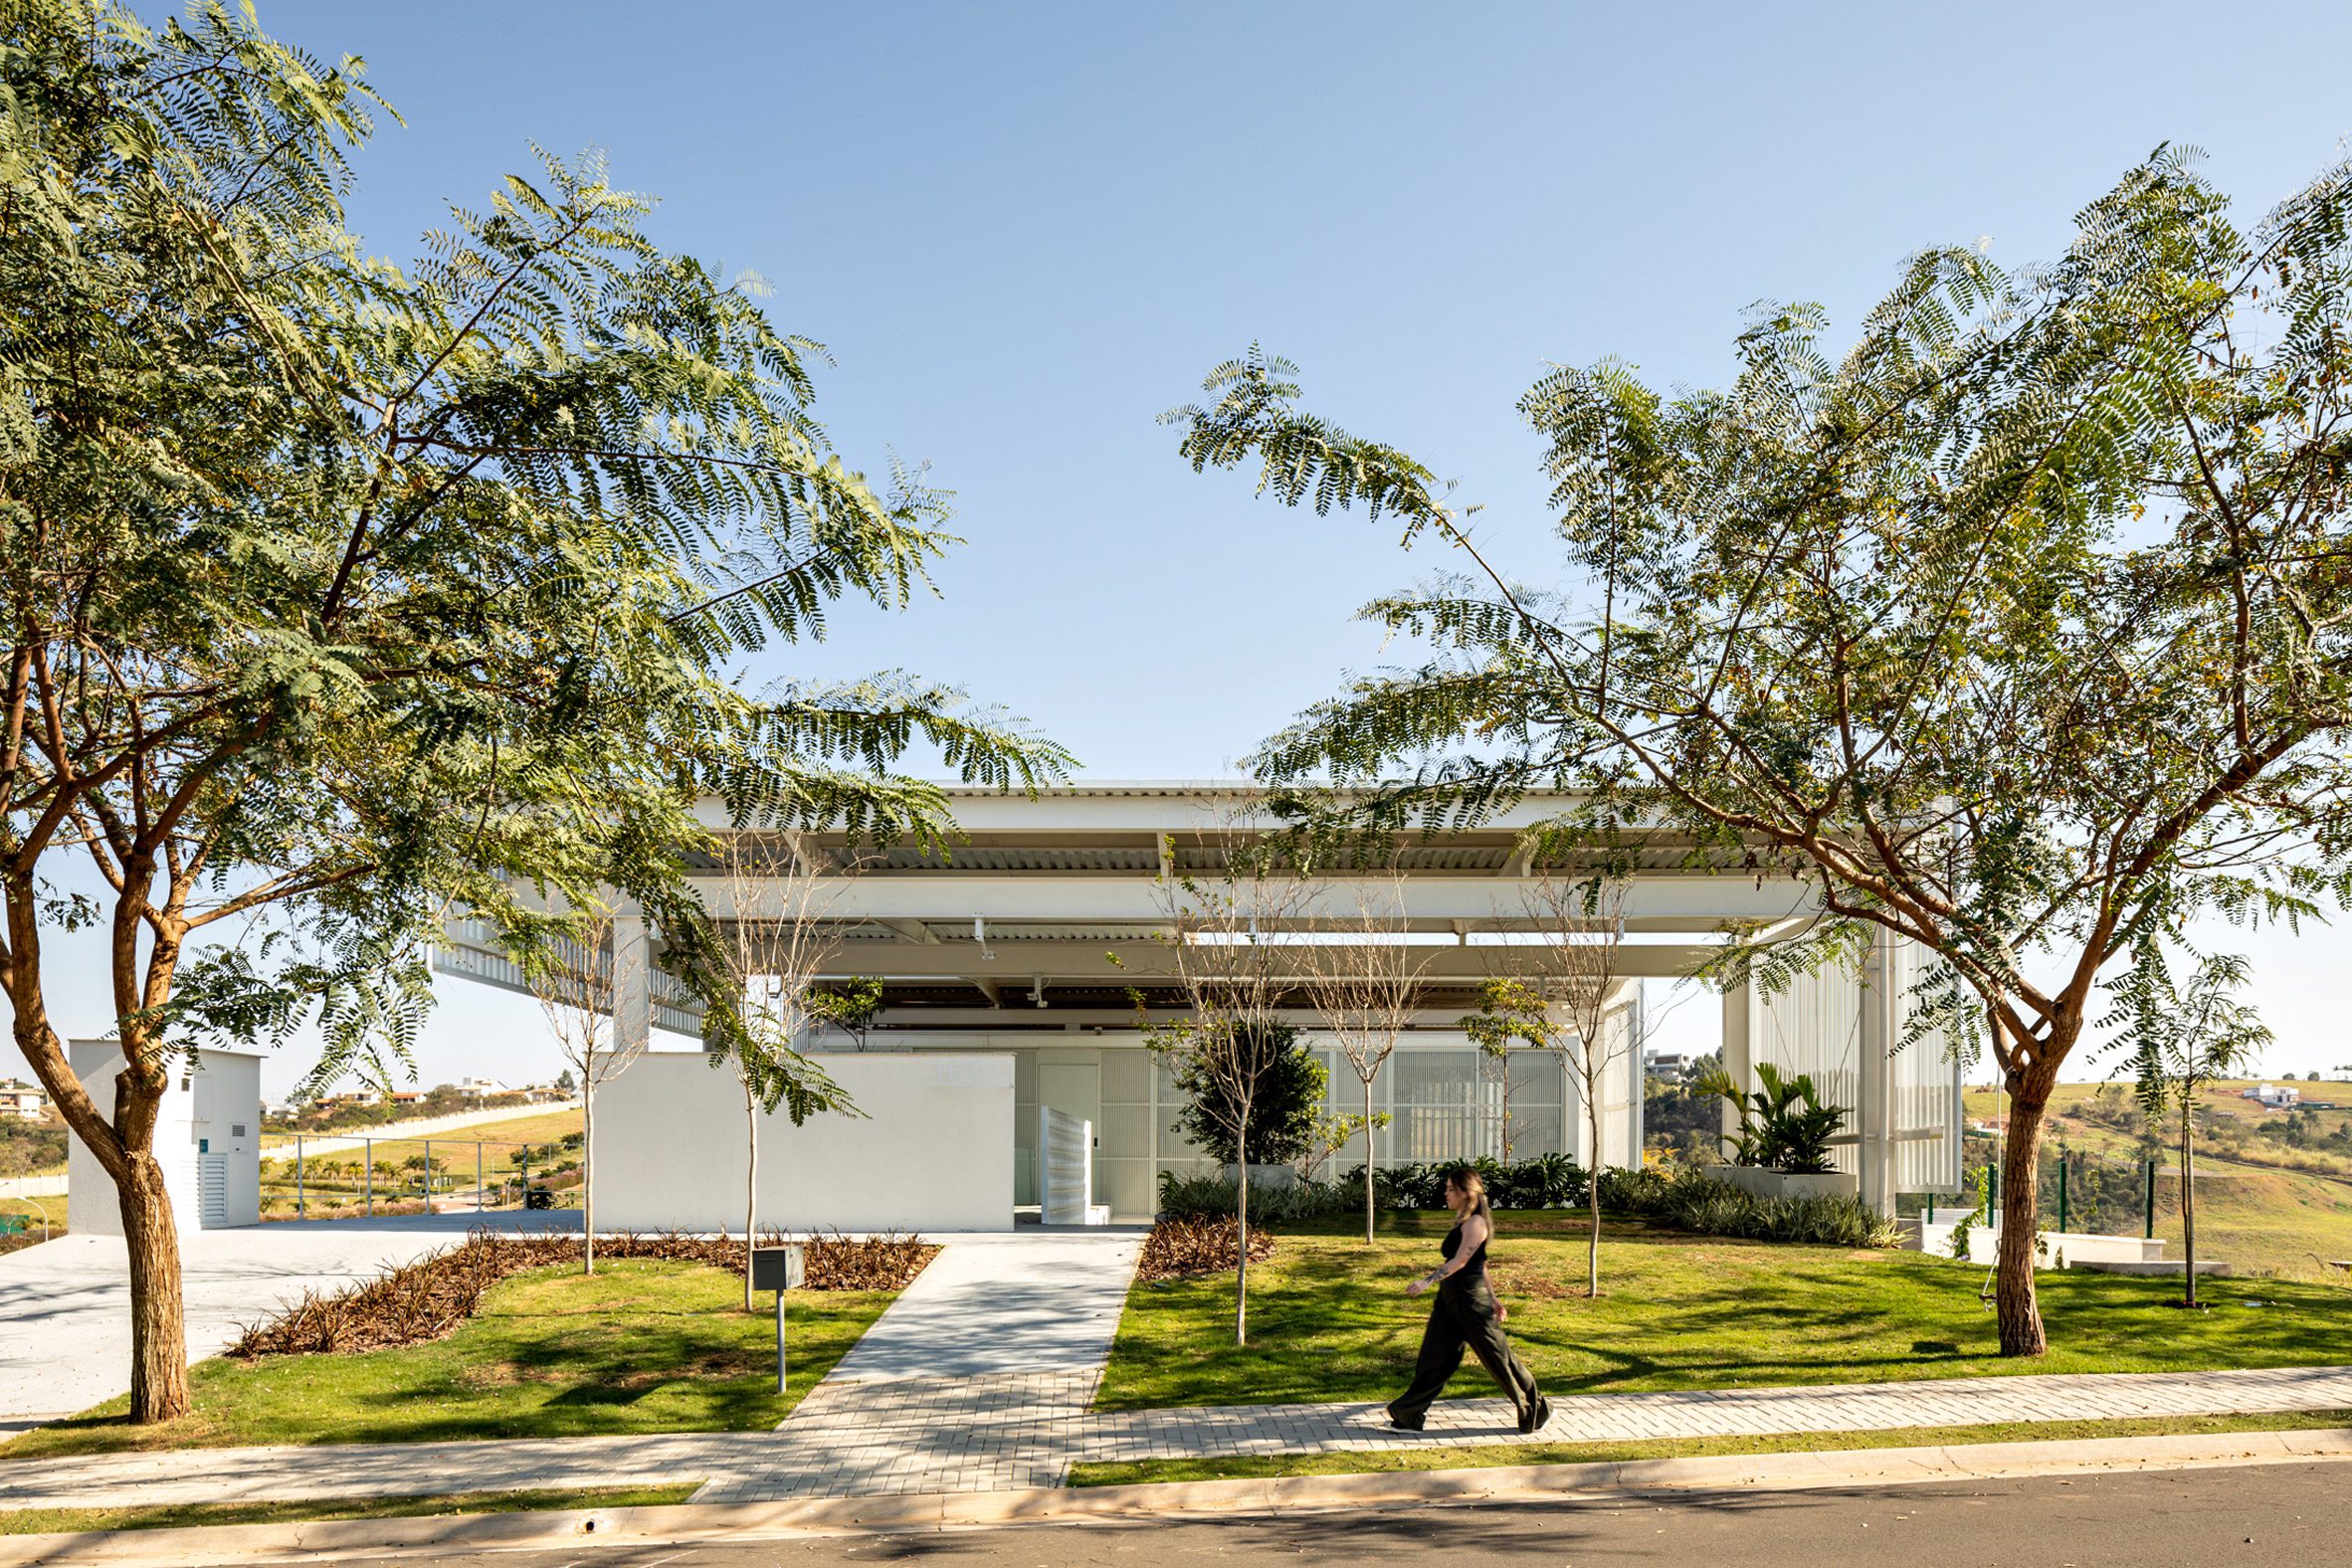 A person walking in front of a contemporary white, residence in Brazil